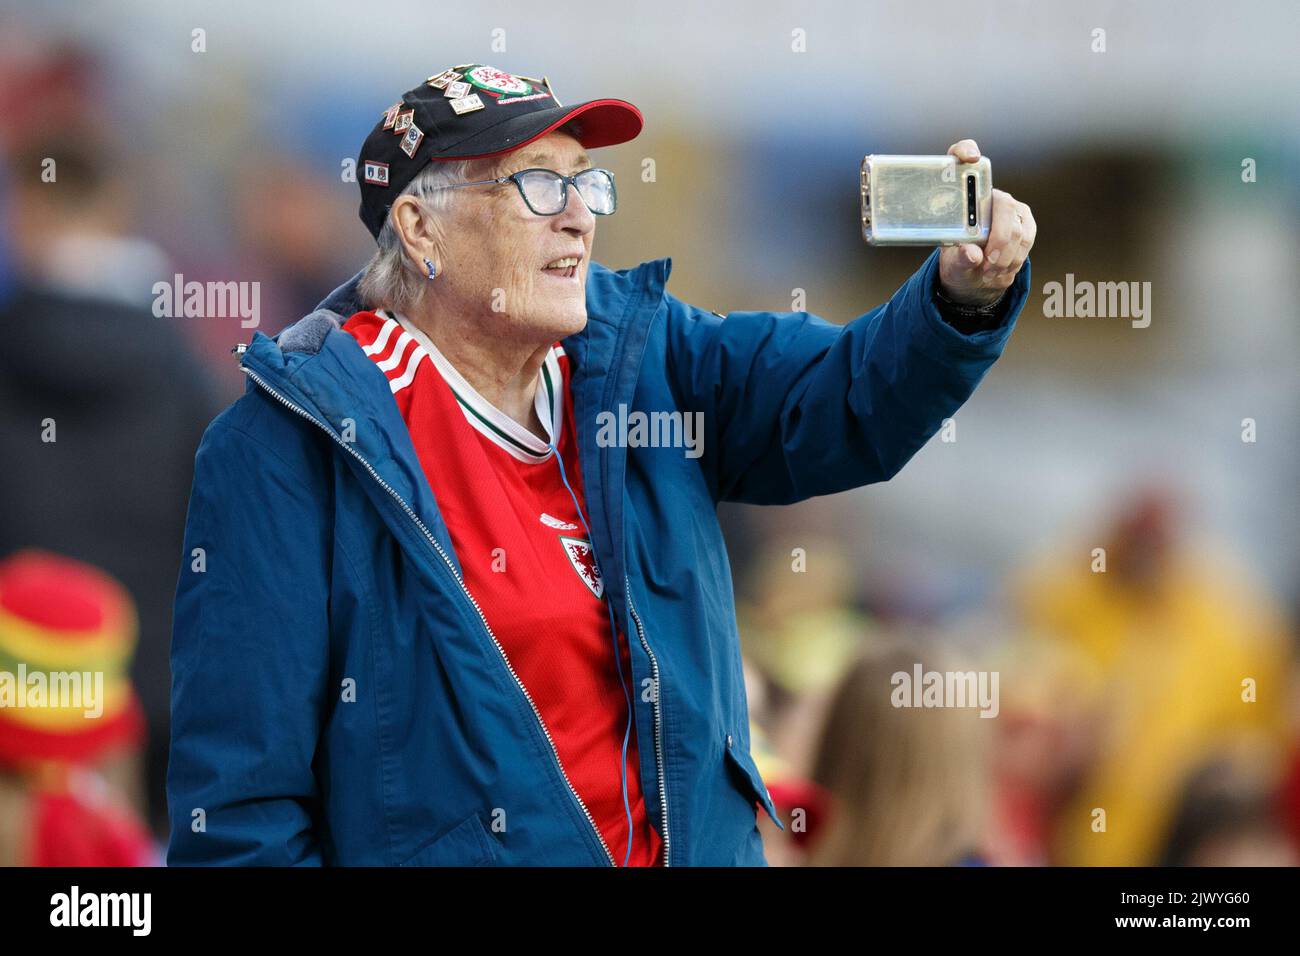 Cardiff, UK. 6th Sep, 2022. A Wales supporter takes a selfie during the Wales v Slovenia Women's World Cup Qualification match. Credit: Gruffydd Thomas/Alamy Live News Stock Photo